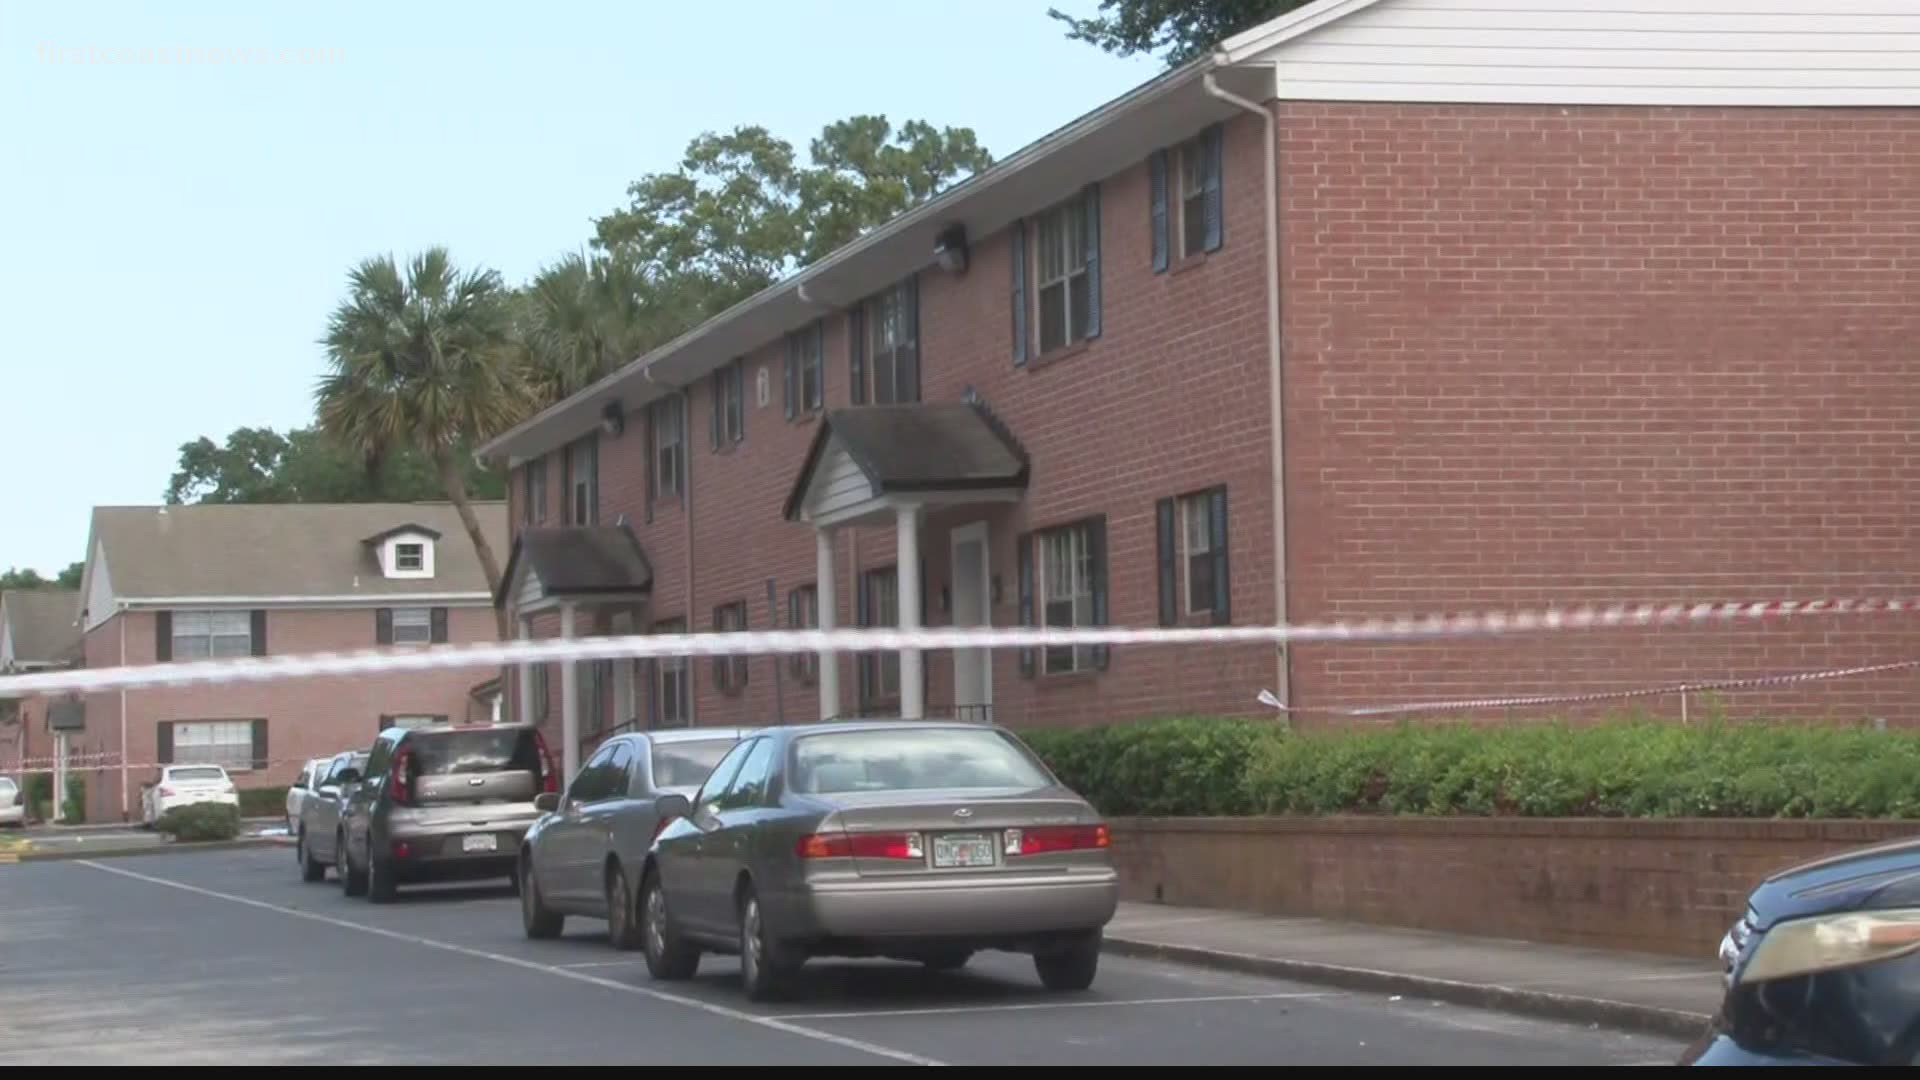 Investigators believe the victim was meeting with two Black men at the apartment complex immediately before the shooting, police said.